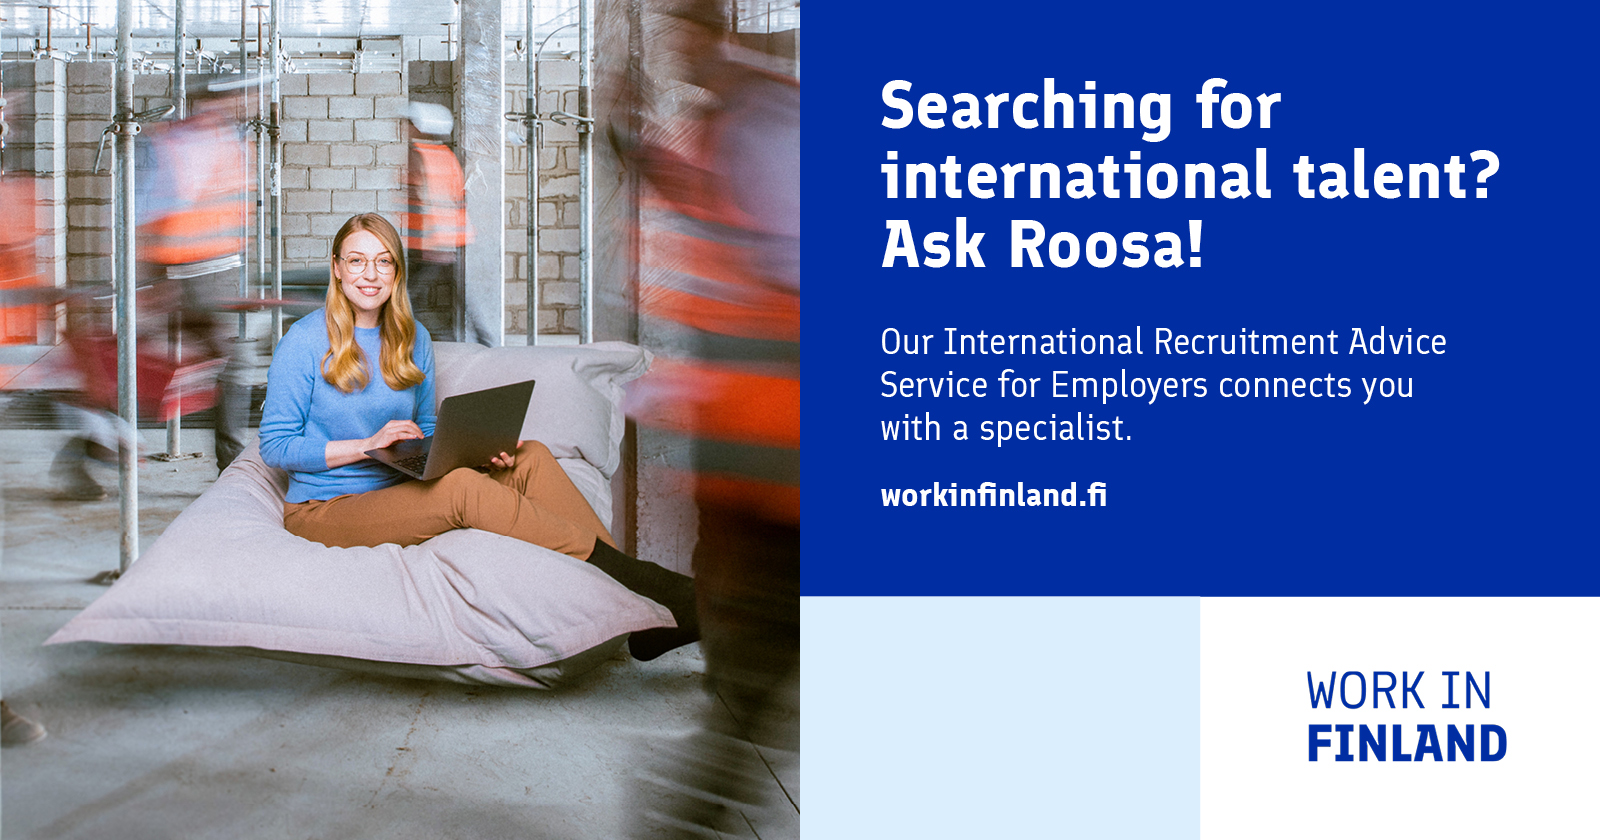 Work in Finland Recruitment Advice Service for Employers.